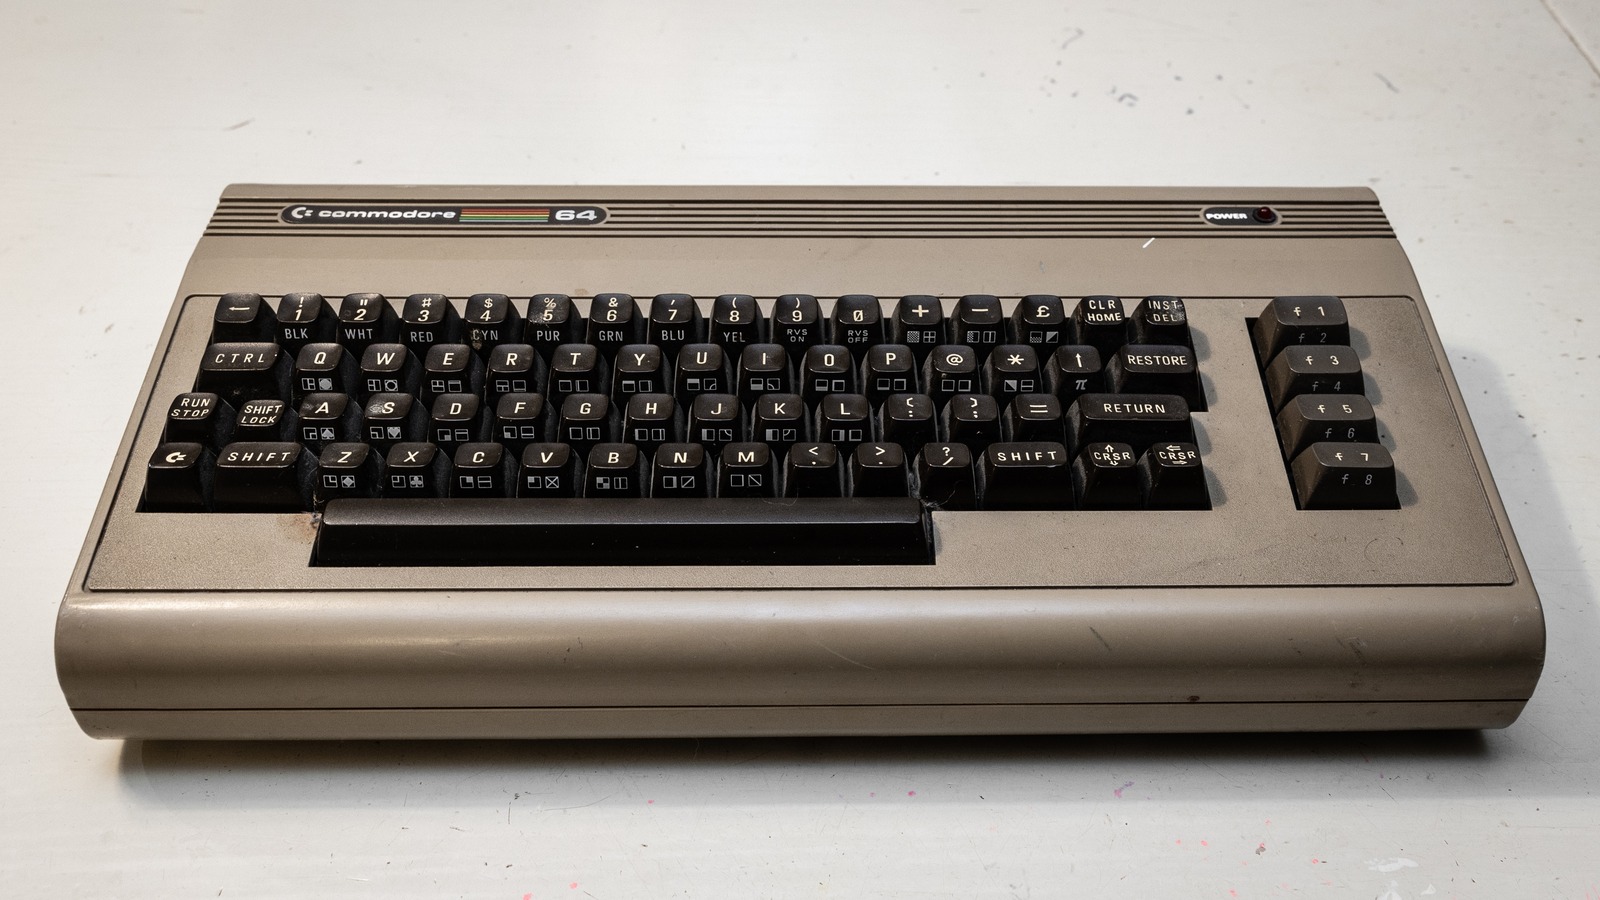 The 64 is an unofficial reimagining of the Commodore 64